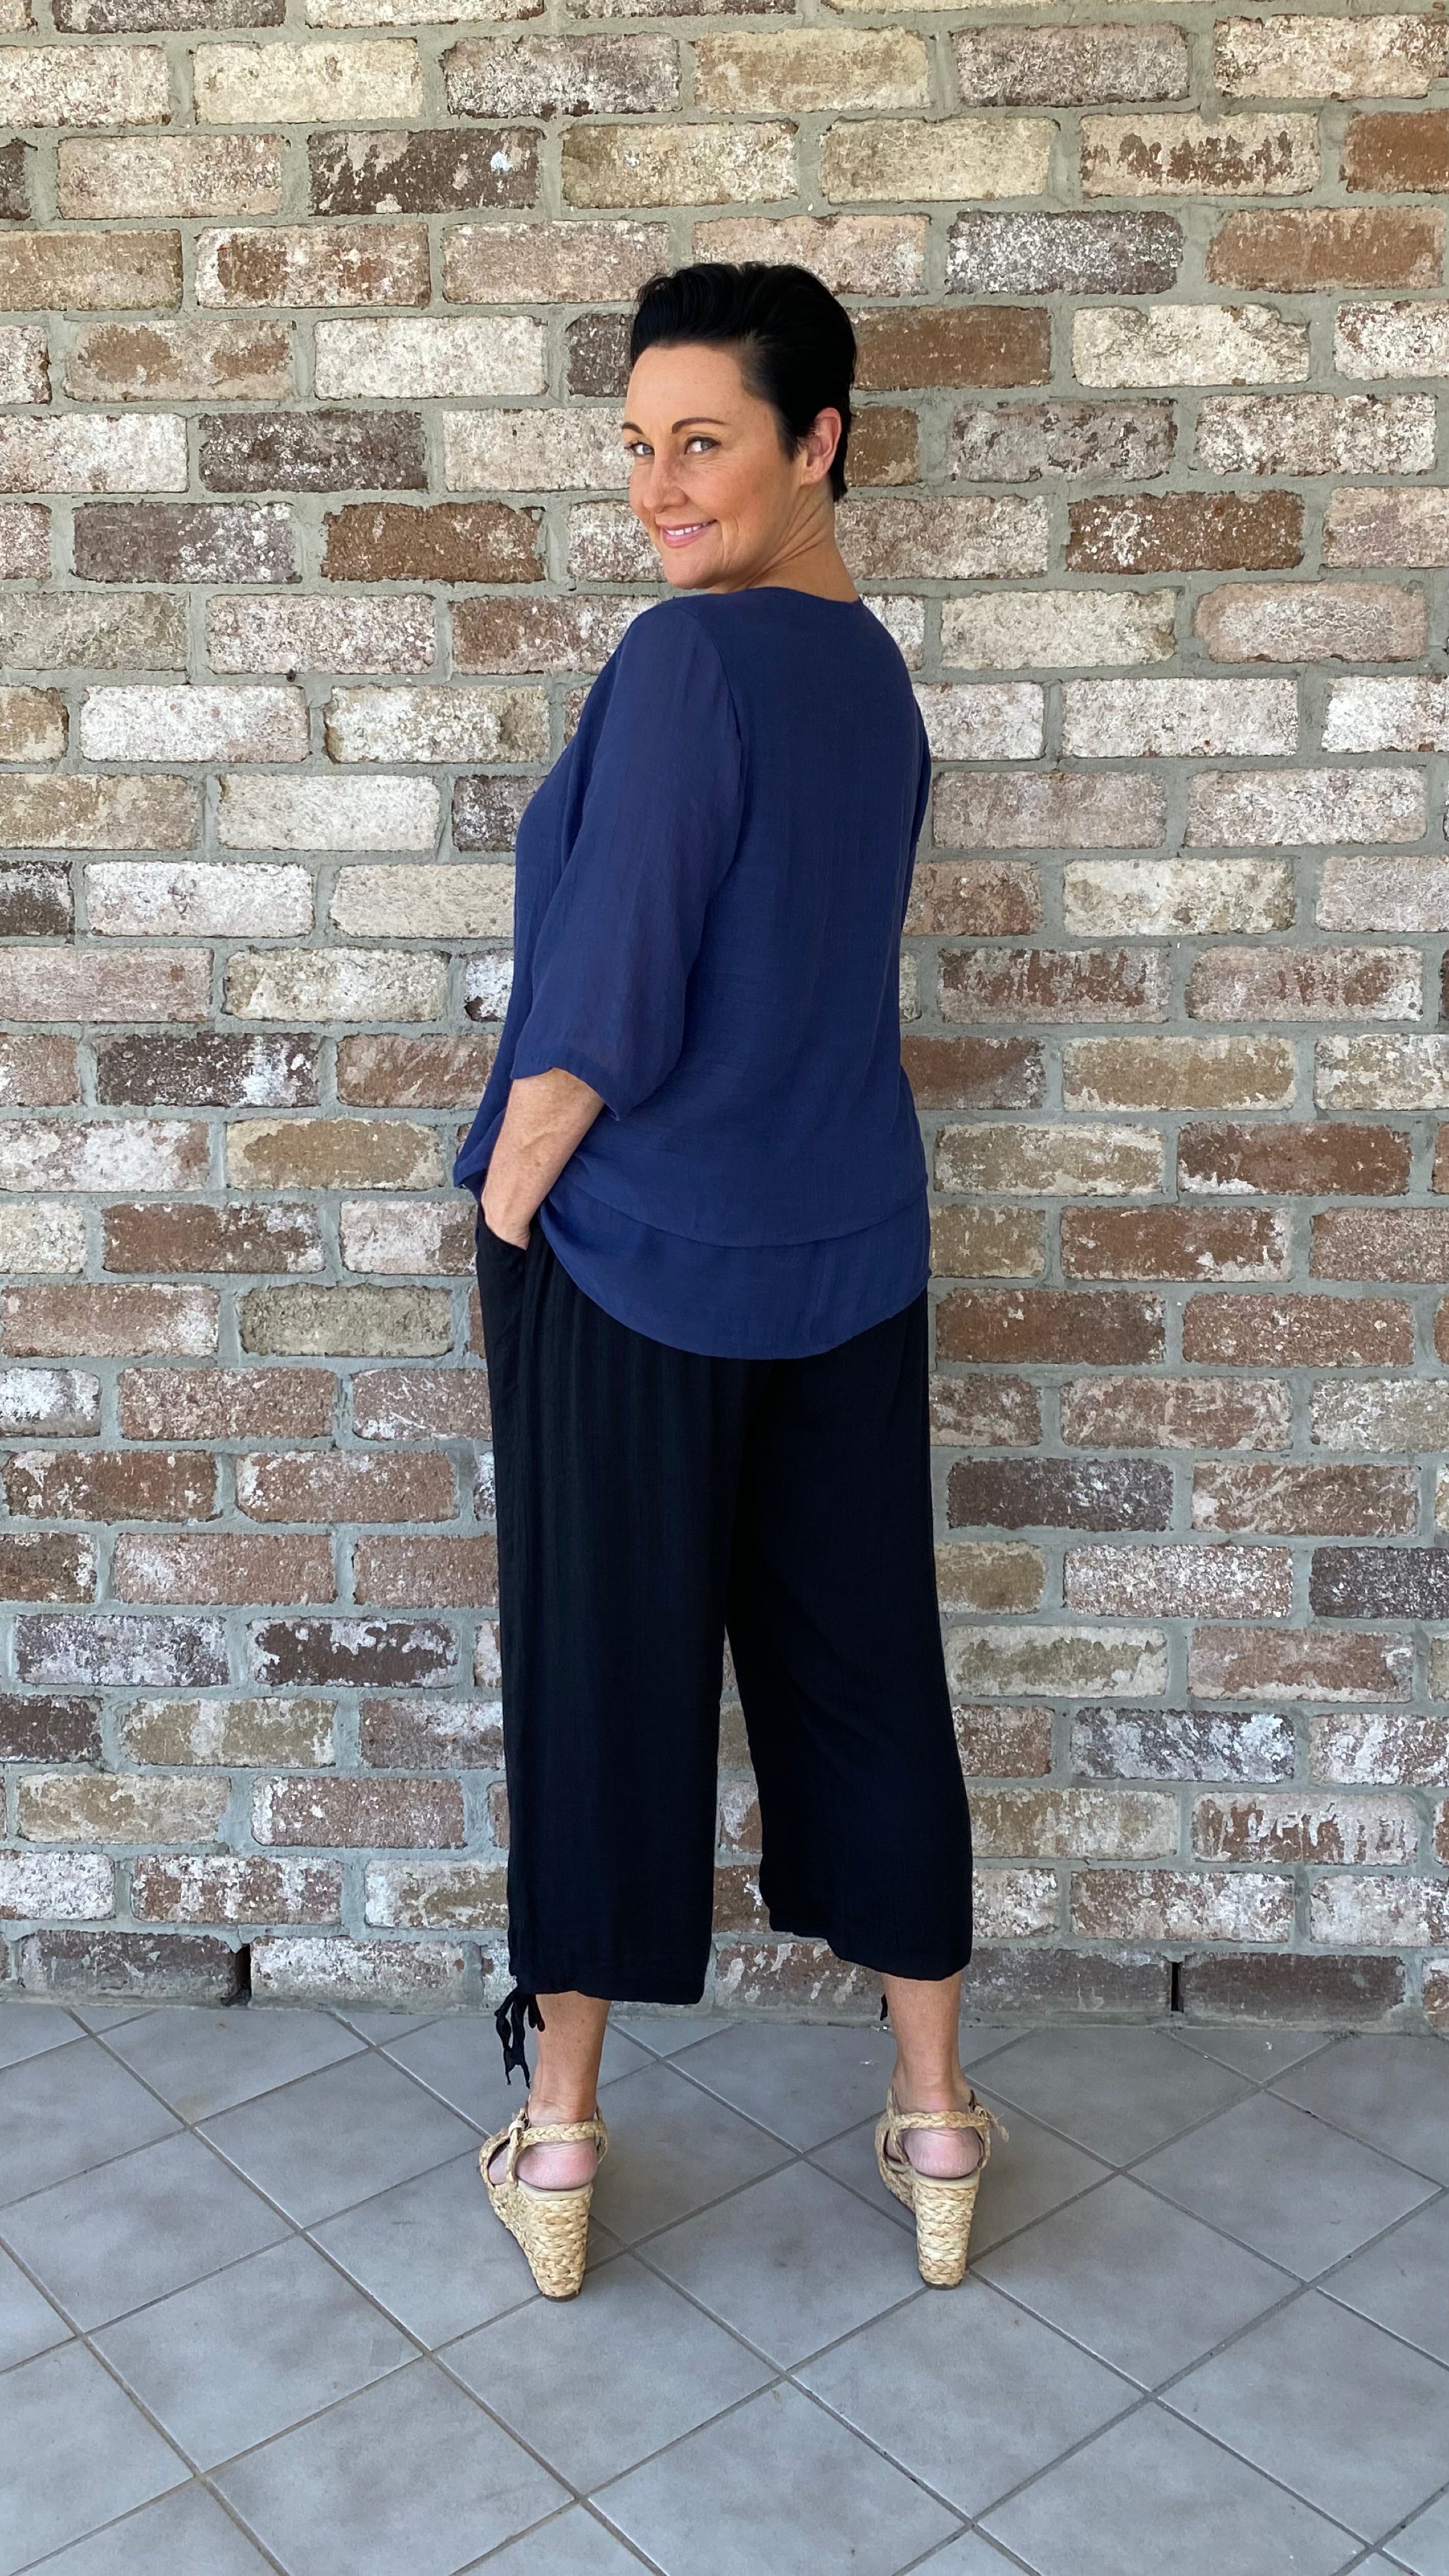 V-Neck Bamboo Cotton Top in Navy